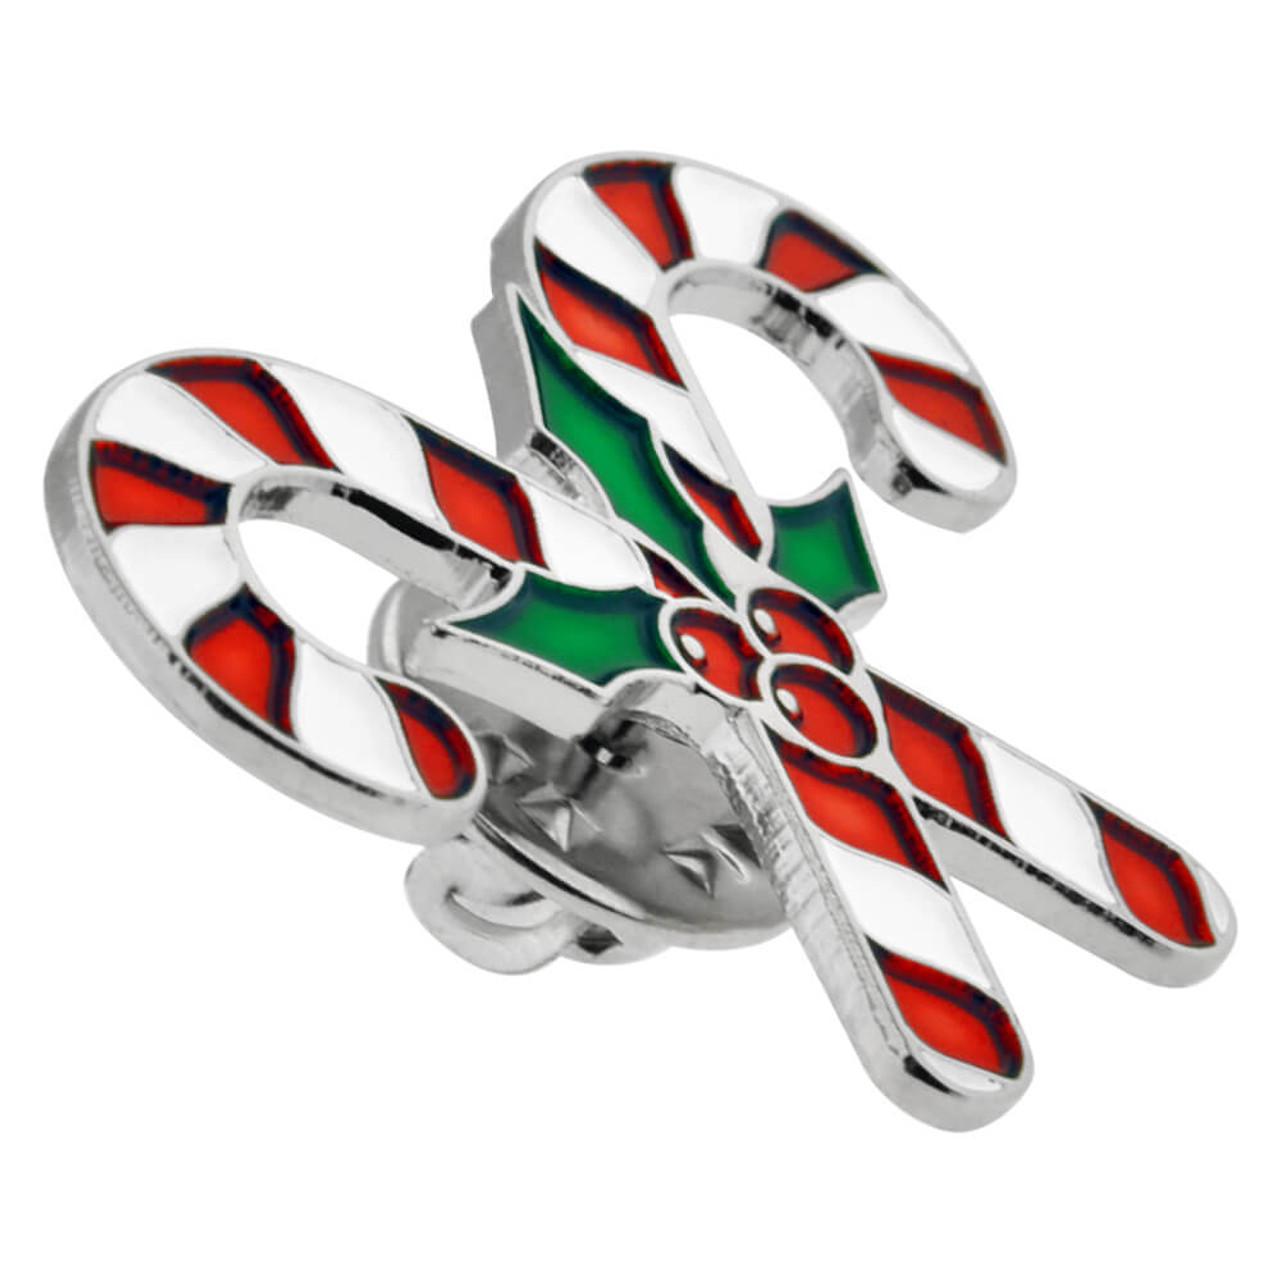 Lapel Pin Meaning of Candy Cane